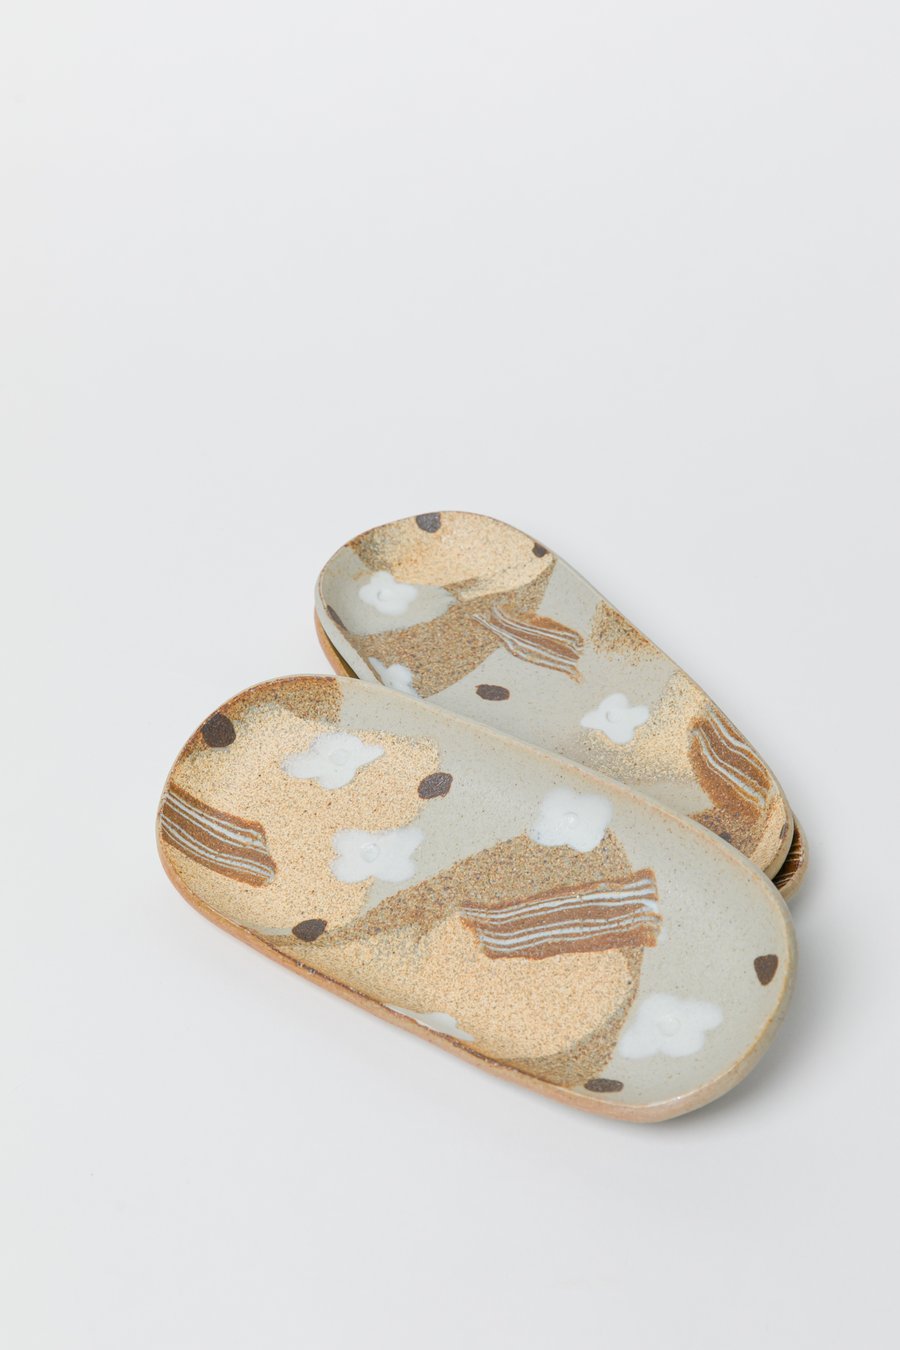 Image of Desert Spring - Long Oval Catchall